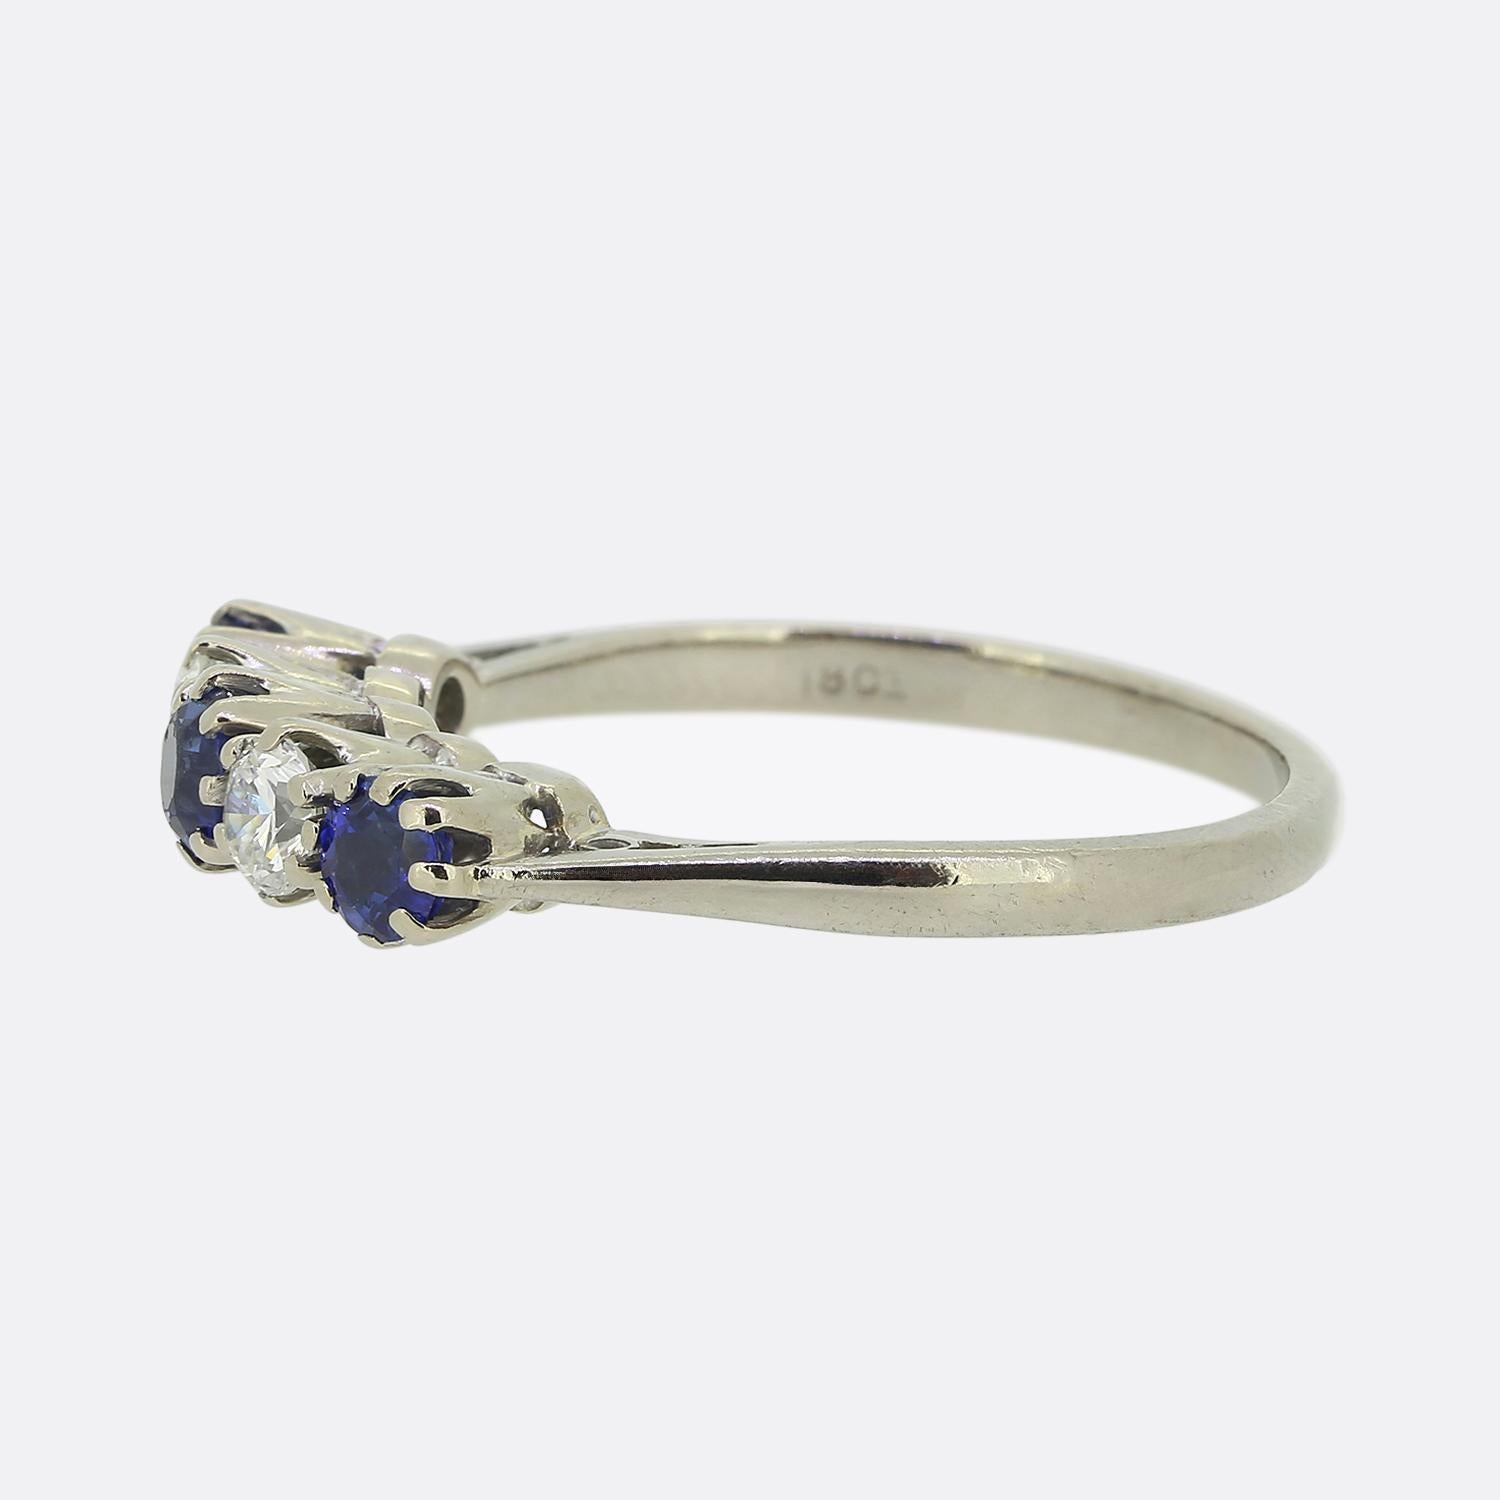 Here we have a classically styled sapphire and diamond five-stone ring. This vintage piece has been crafted from 18ct white gold and features three round faceted sapphires possessing an electric medium blue colour tone. These perfectly matched